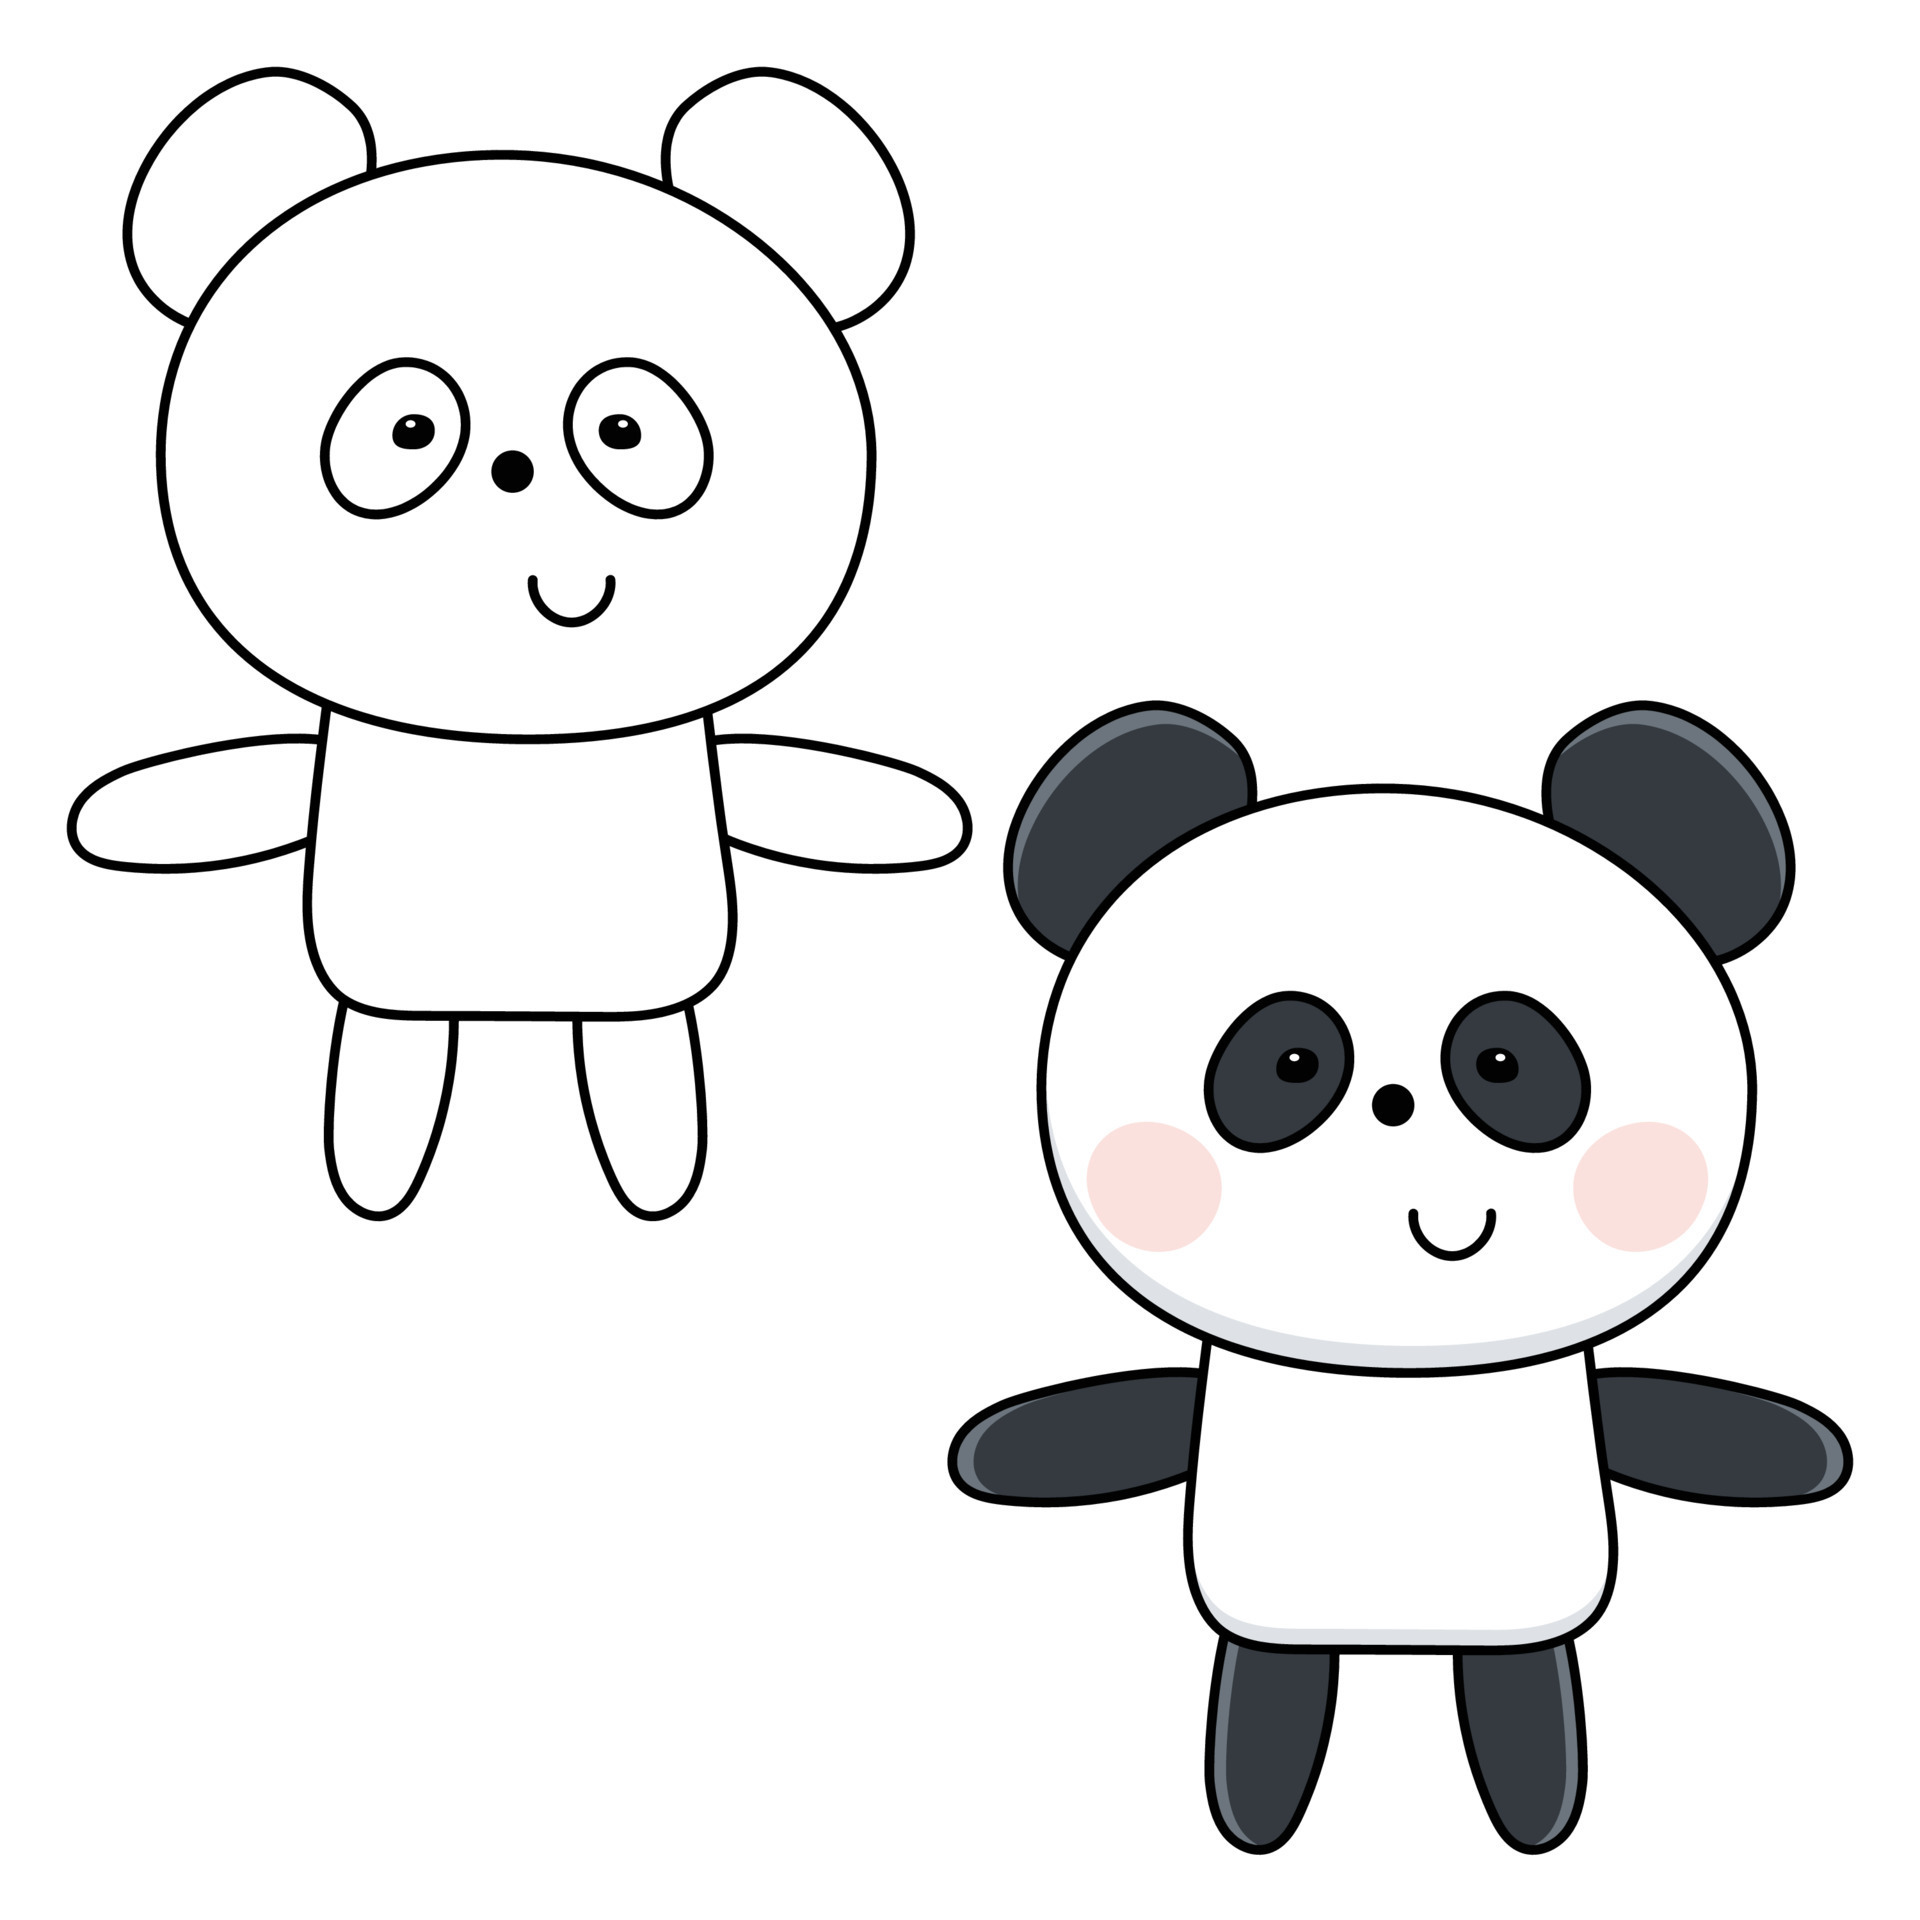 Coloring page with cute panda. Color and black white vector illustration  for kids coloring book with outlined clipart to color. Kids learning game.  Cartoon kawaii animal. Simple linear design, eps10 15435005 Vector